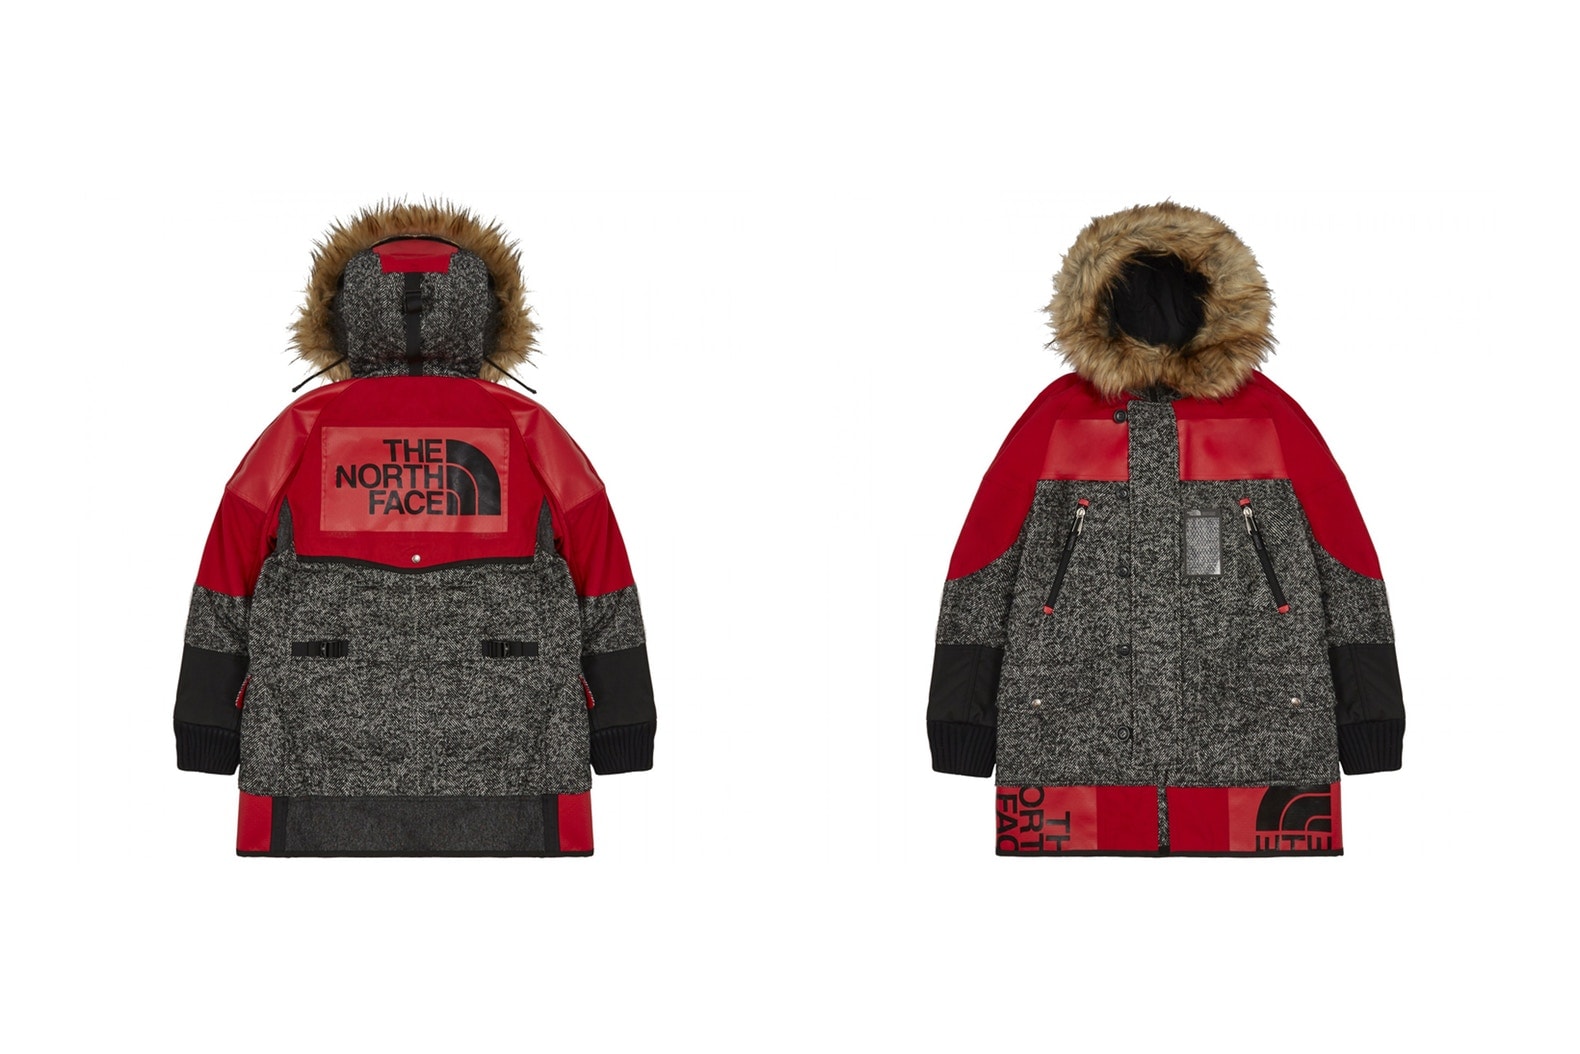 Junya Watanabe MAN x The North Face 2017 Fall/Winter Outerwear Collection DSML